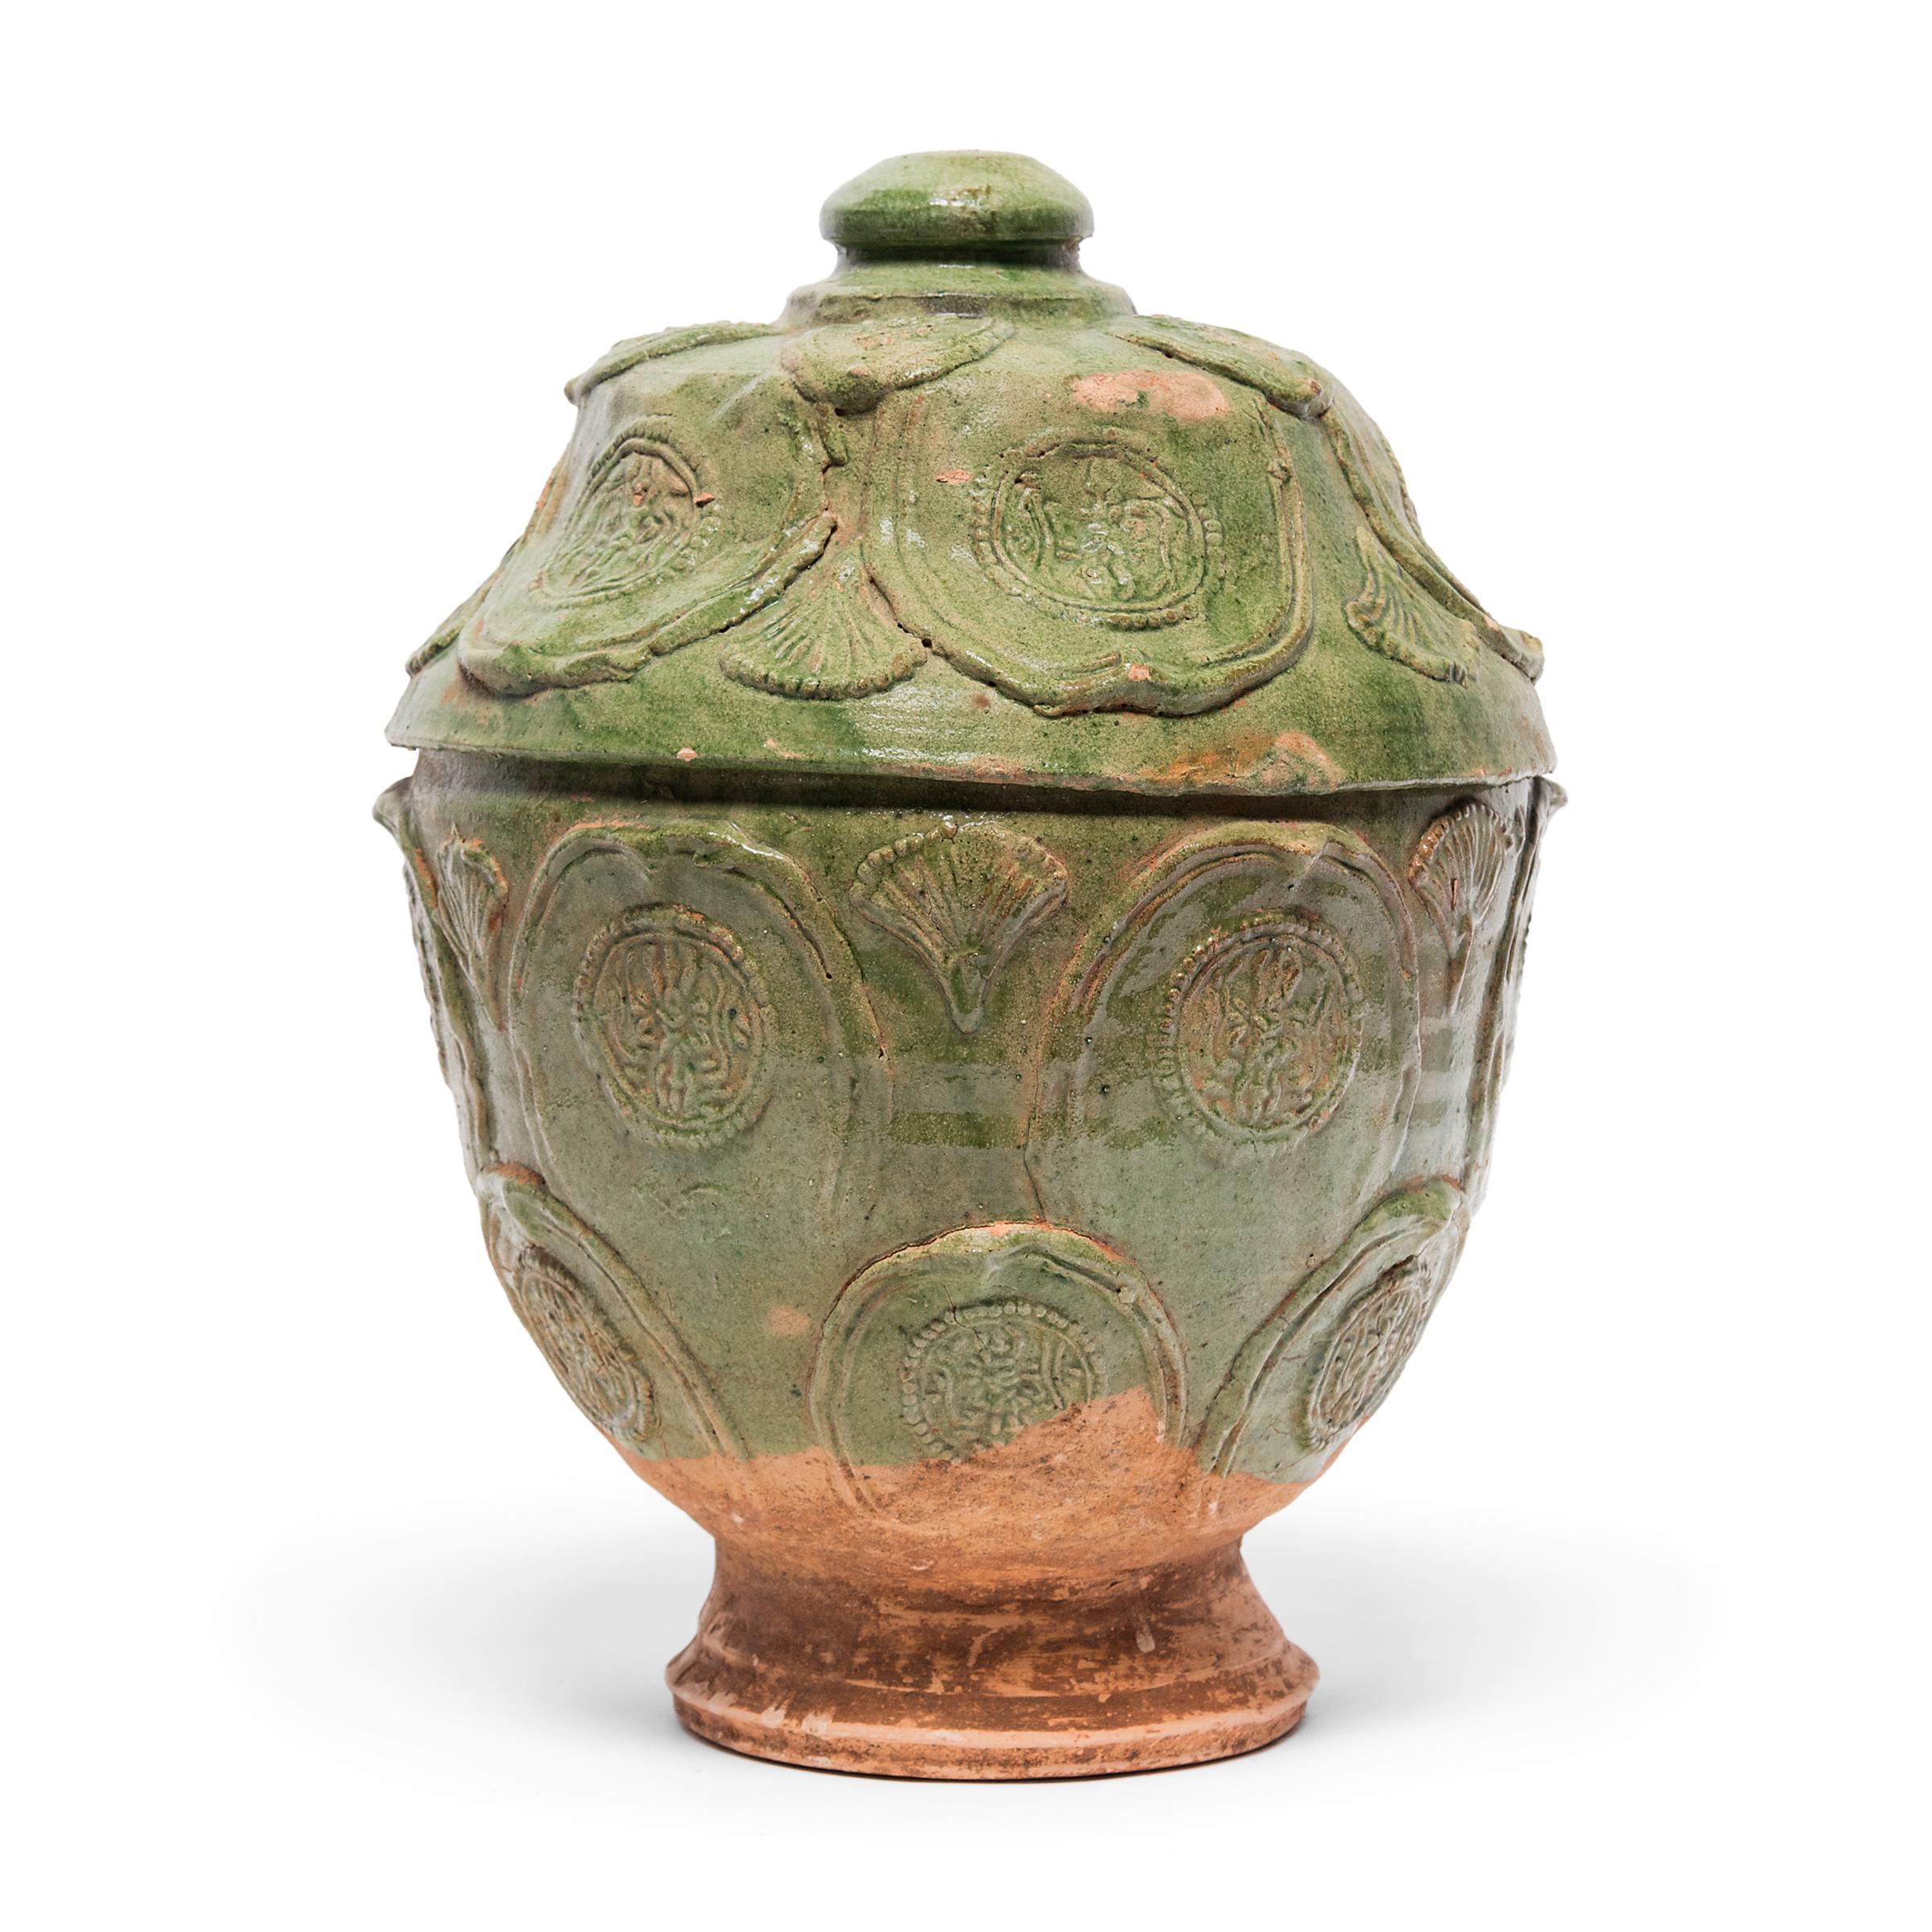 This unusual lidded jar exemplifies the timeless rustic appeal of provincial Chinese pottery. Dated to the late 19th century, the jar has a tapered form and warm green glaze that recalls ancient funerary jars, used for storing food offerings for